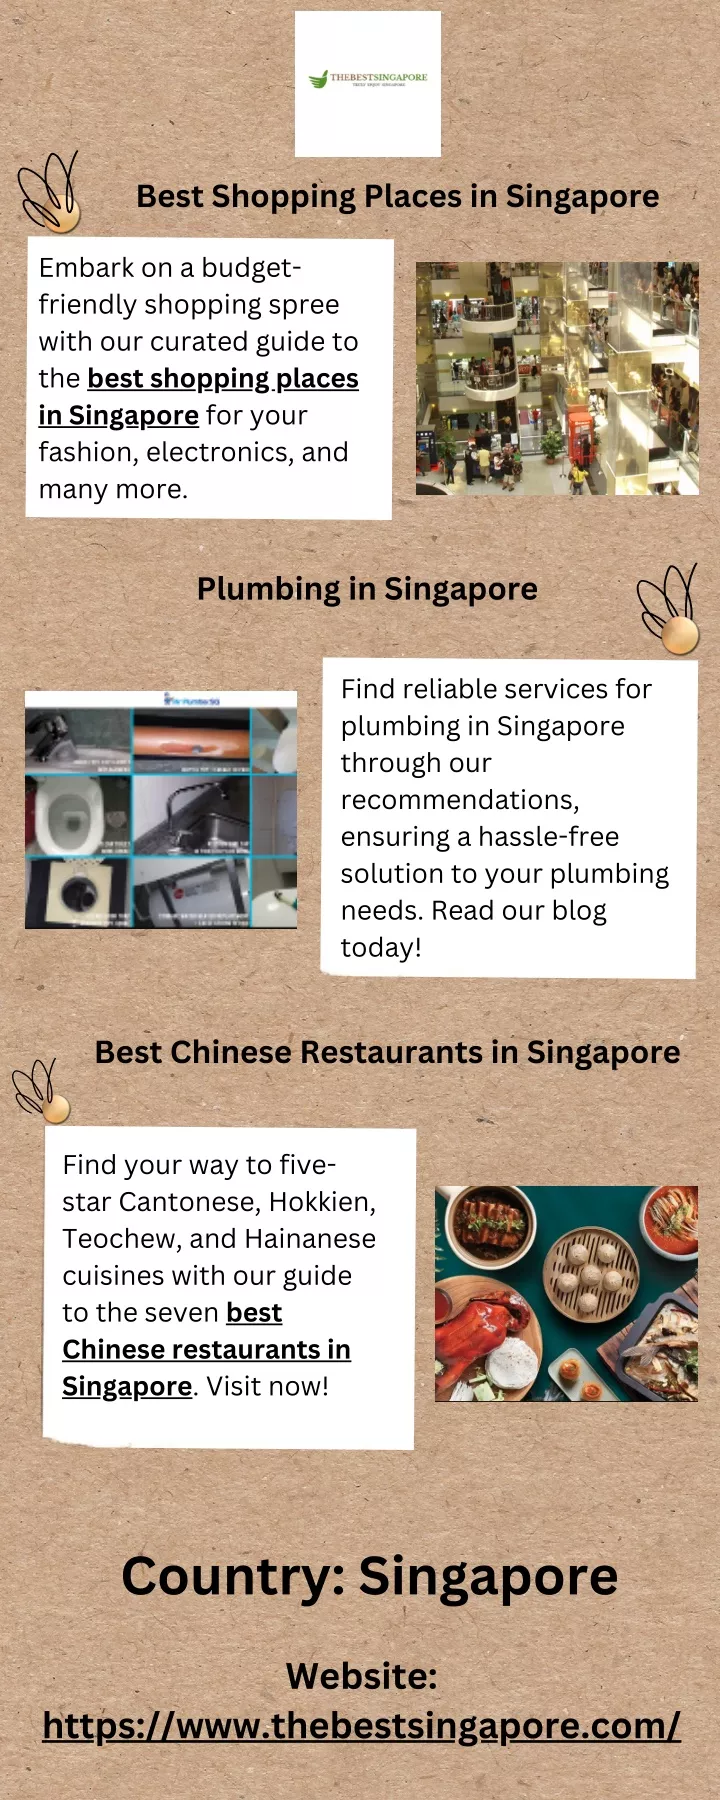 best shopping places in singapore